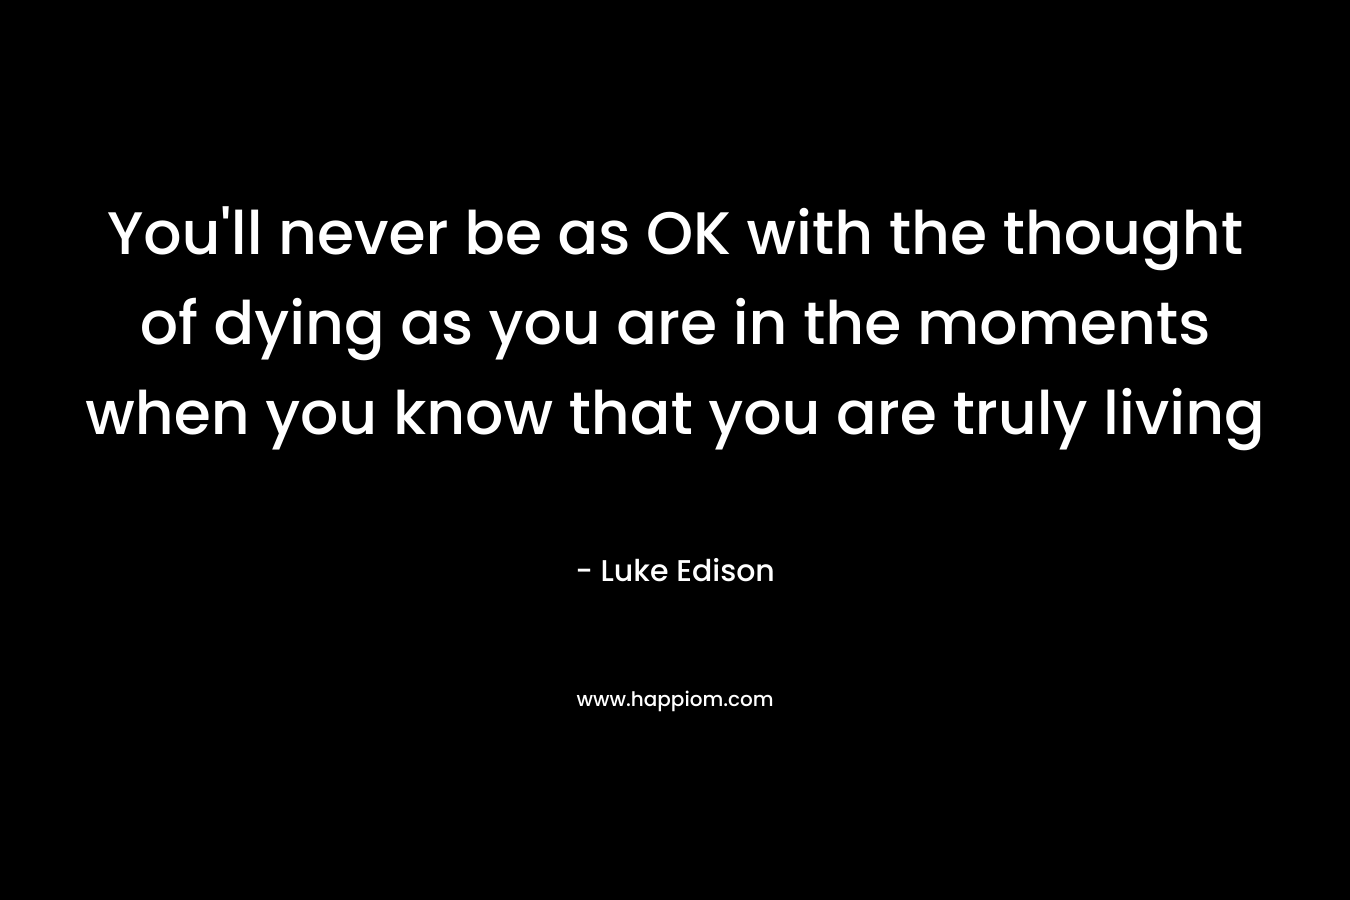 You'll never be as OK with the thought of dying as you are in the moments when you know that you are truly living